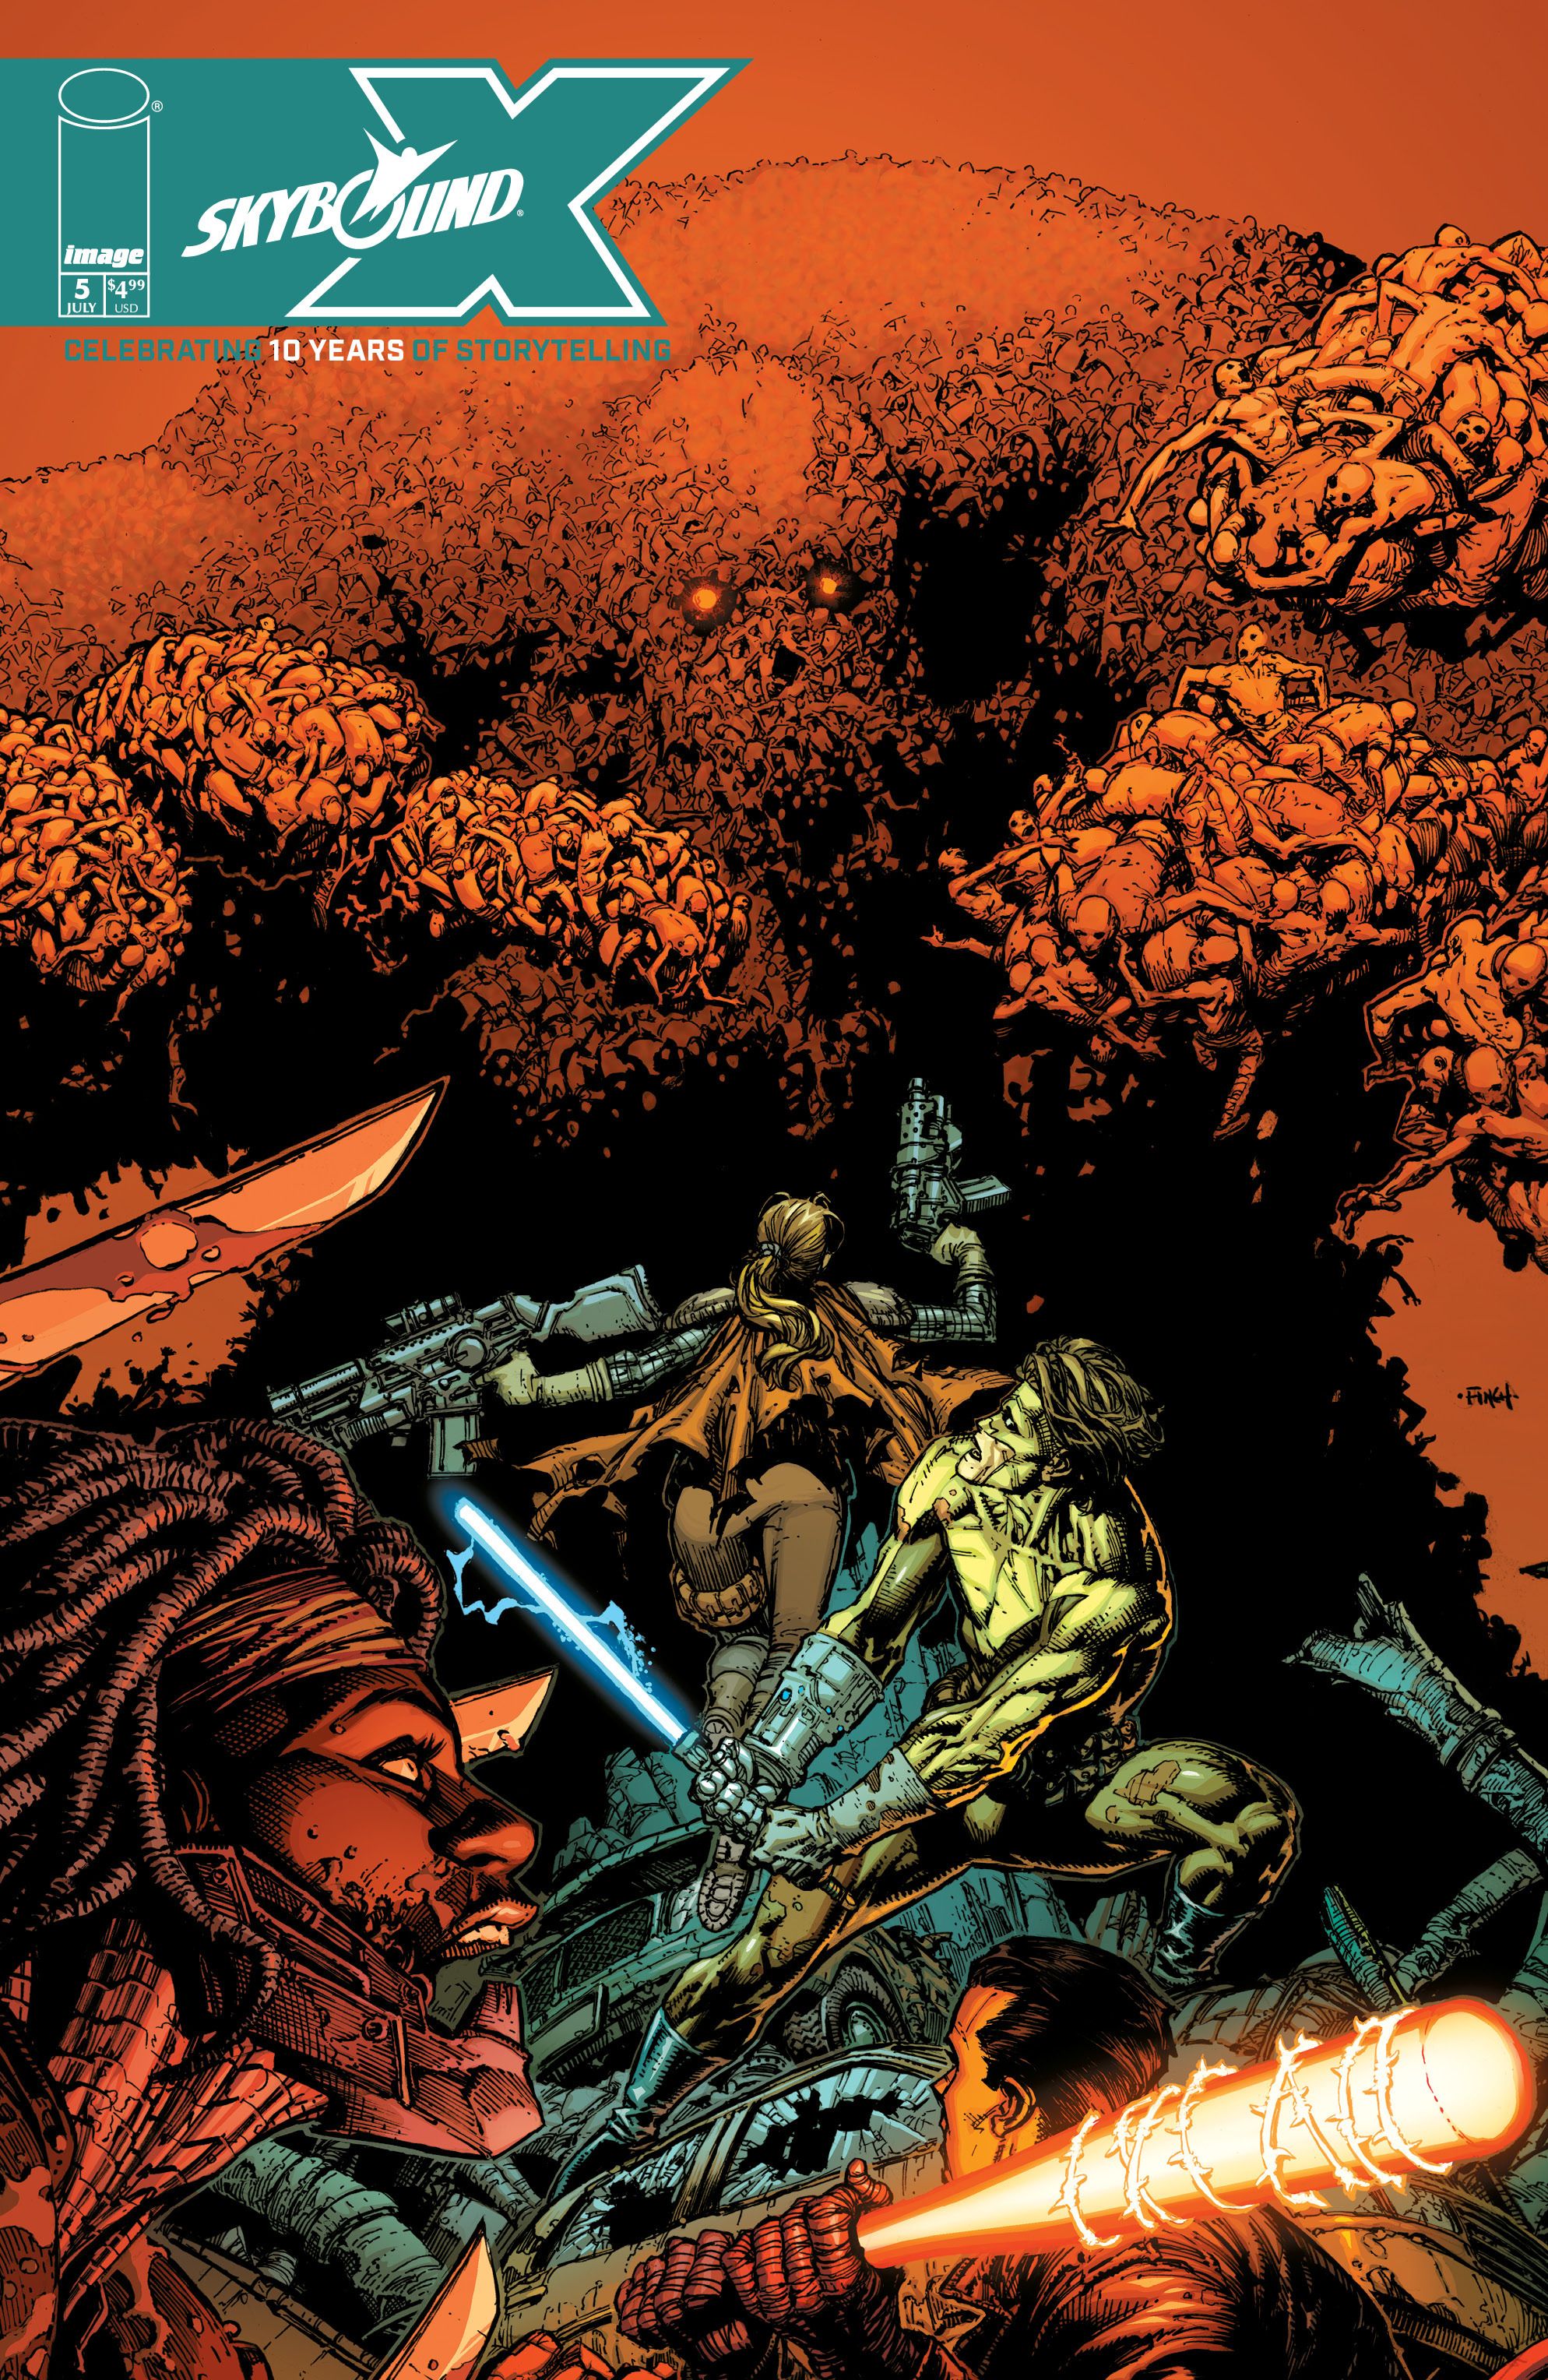 David Finch's Skybound X #5 cover